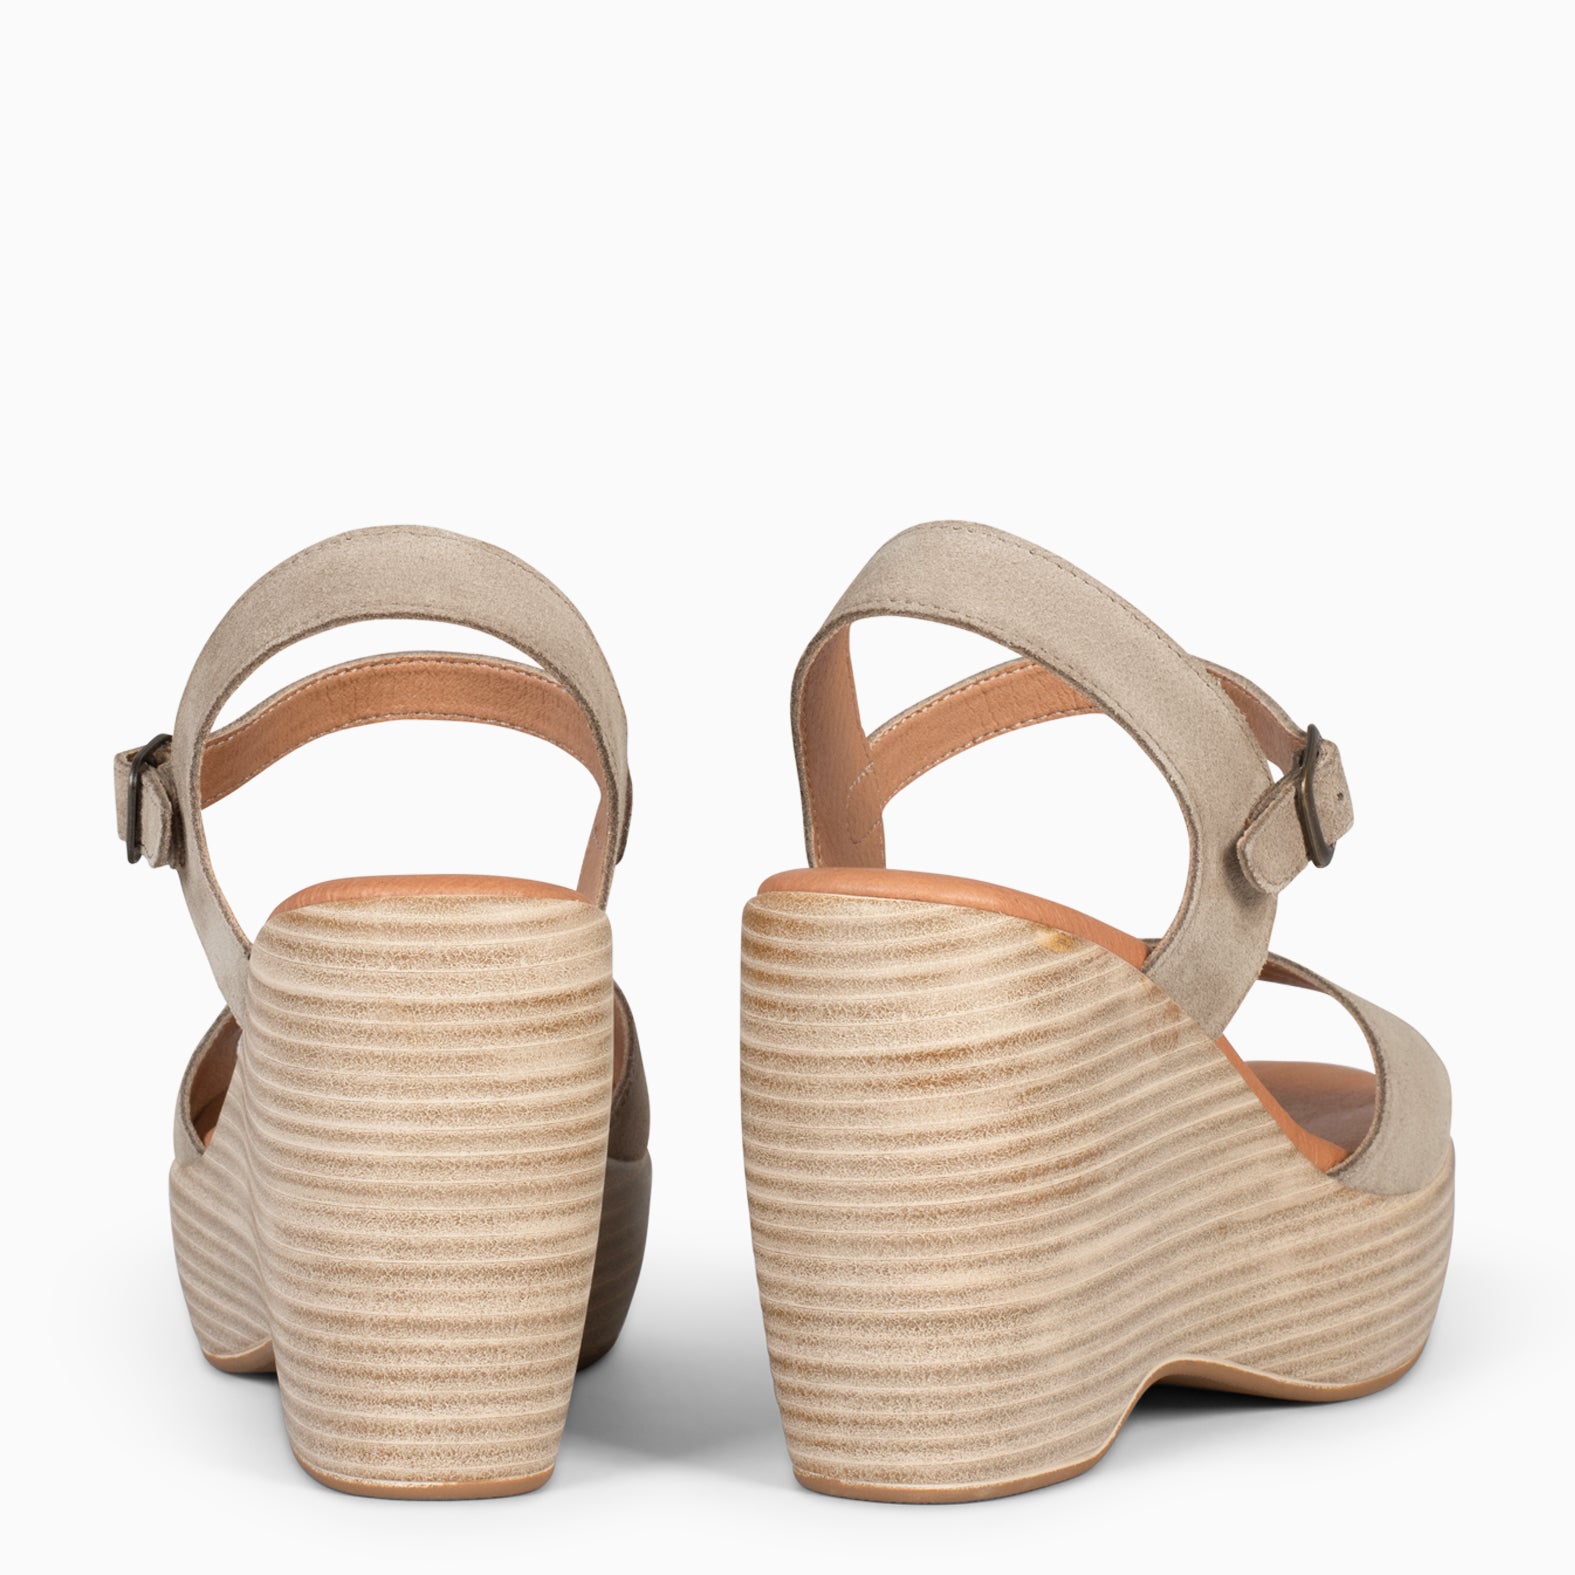 SIDNEY – TAUPE wedge sandals